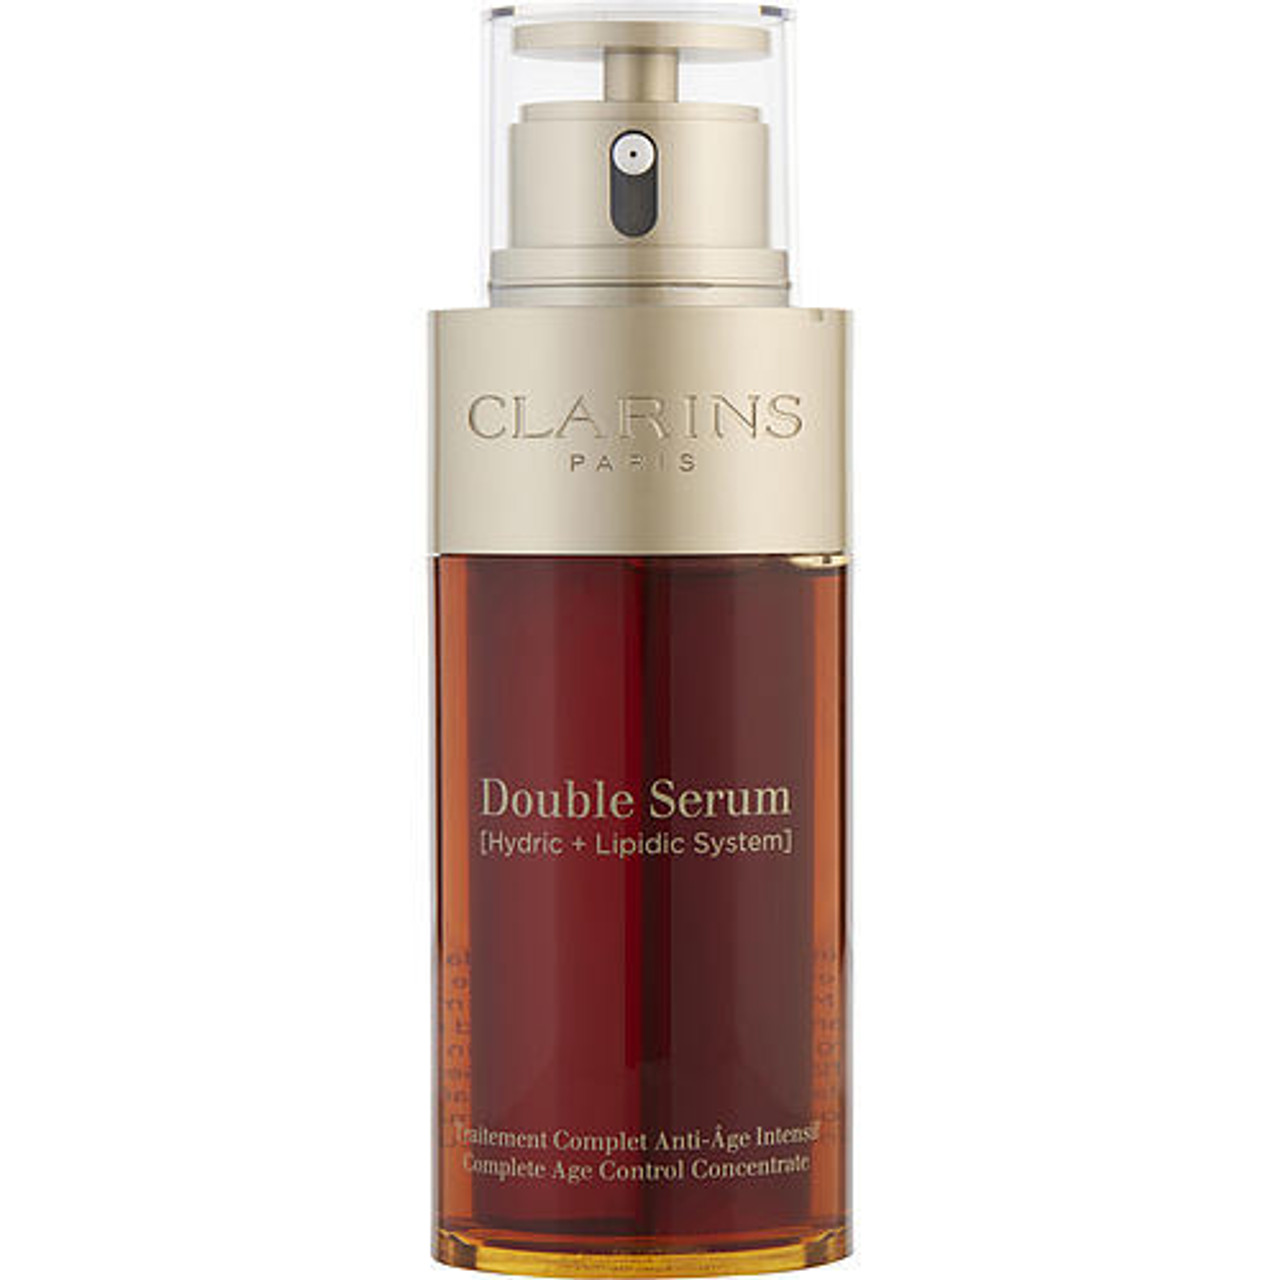 Lifting Serum for Face - The Organic Pharmacy Gene Expression